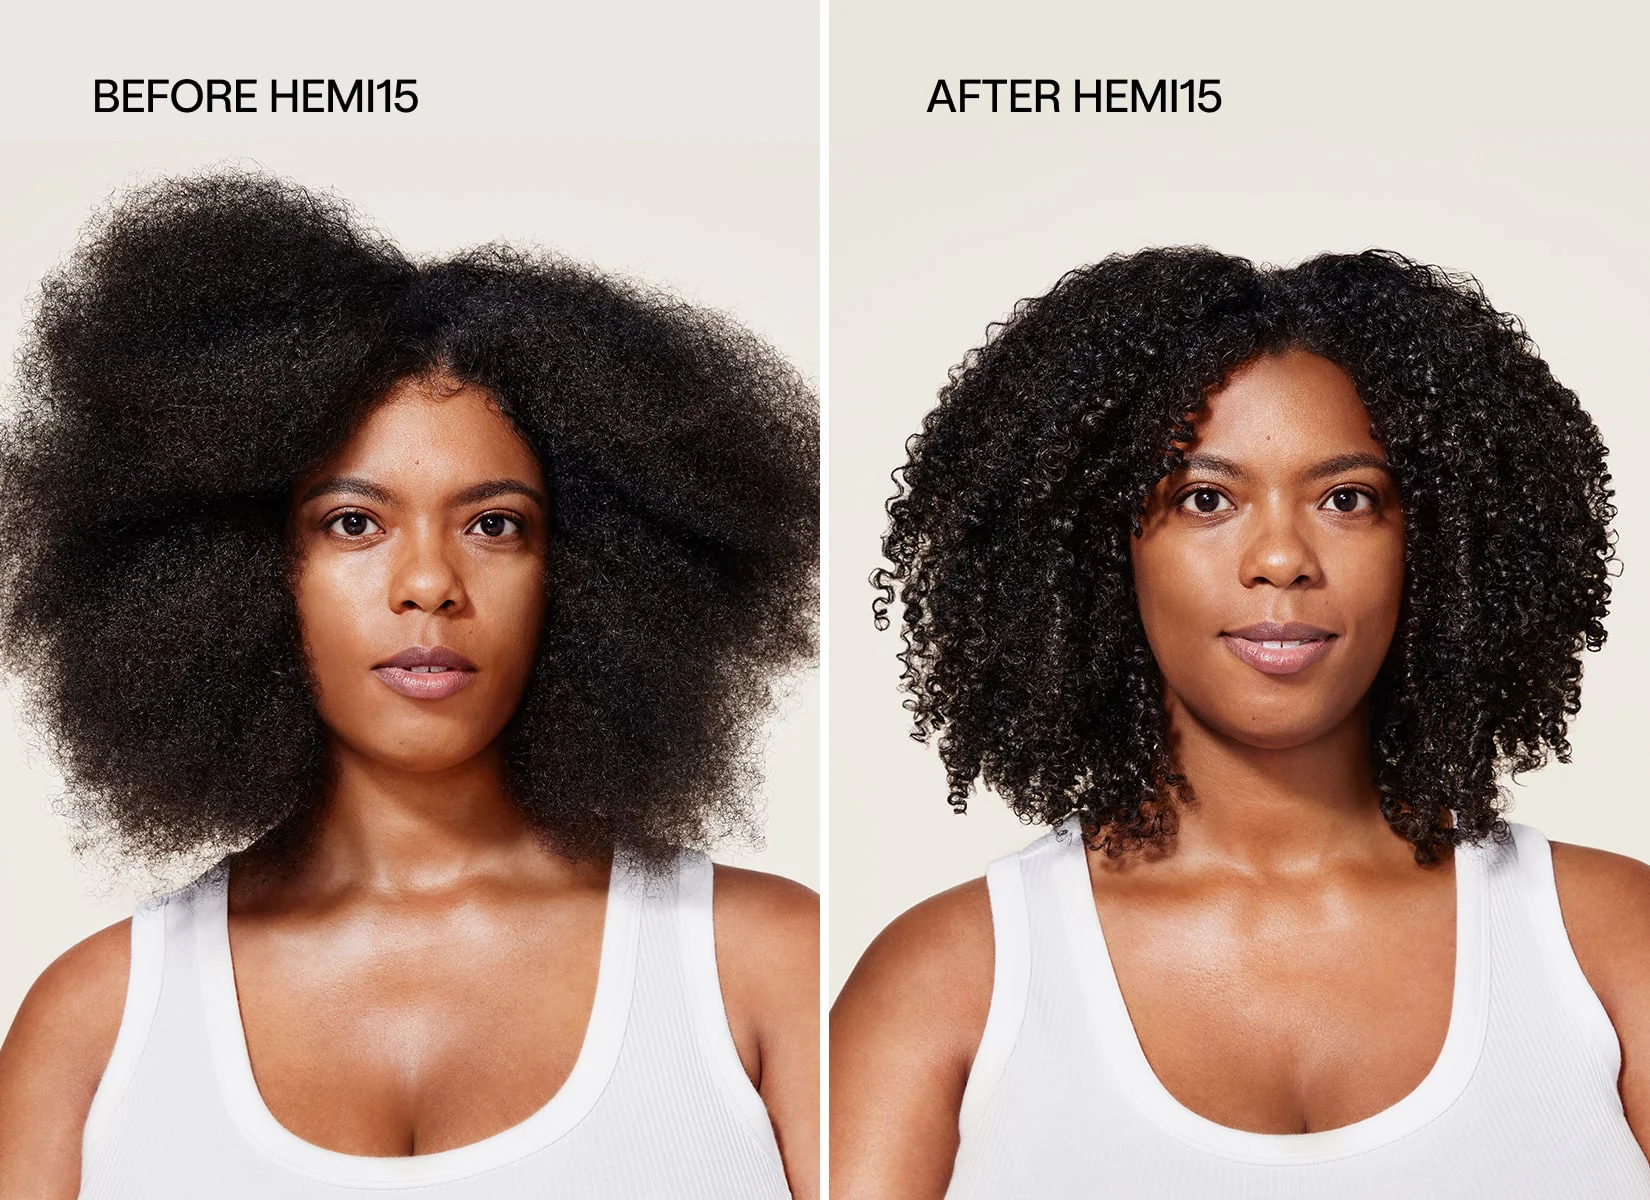 Results from using 4U by Tia’s products, induced with the powerful HEMI15